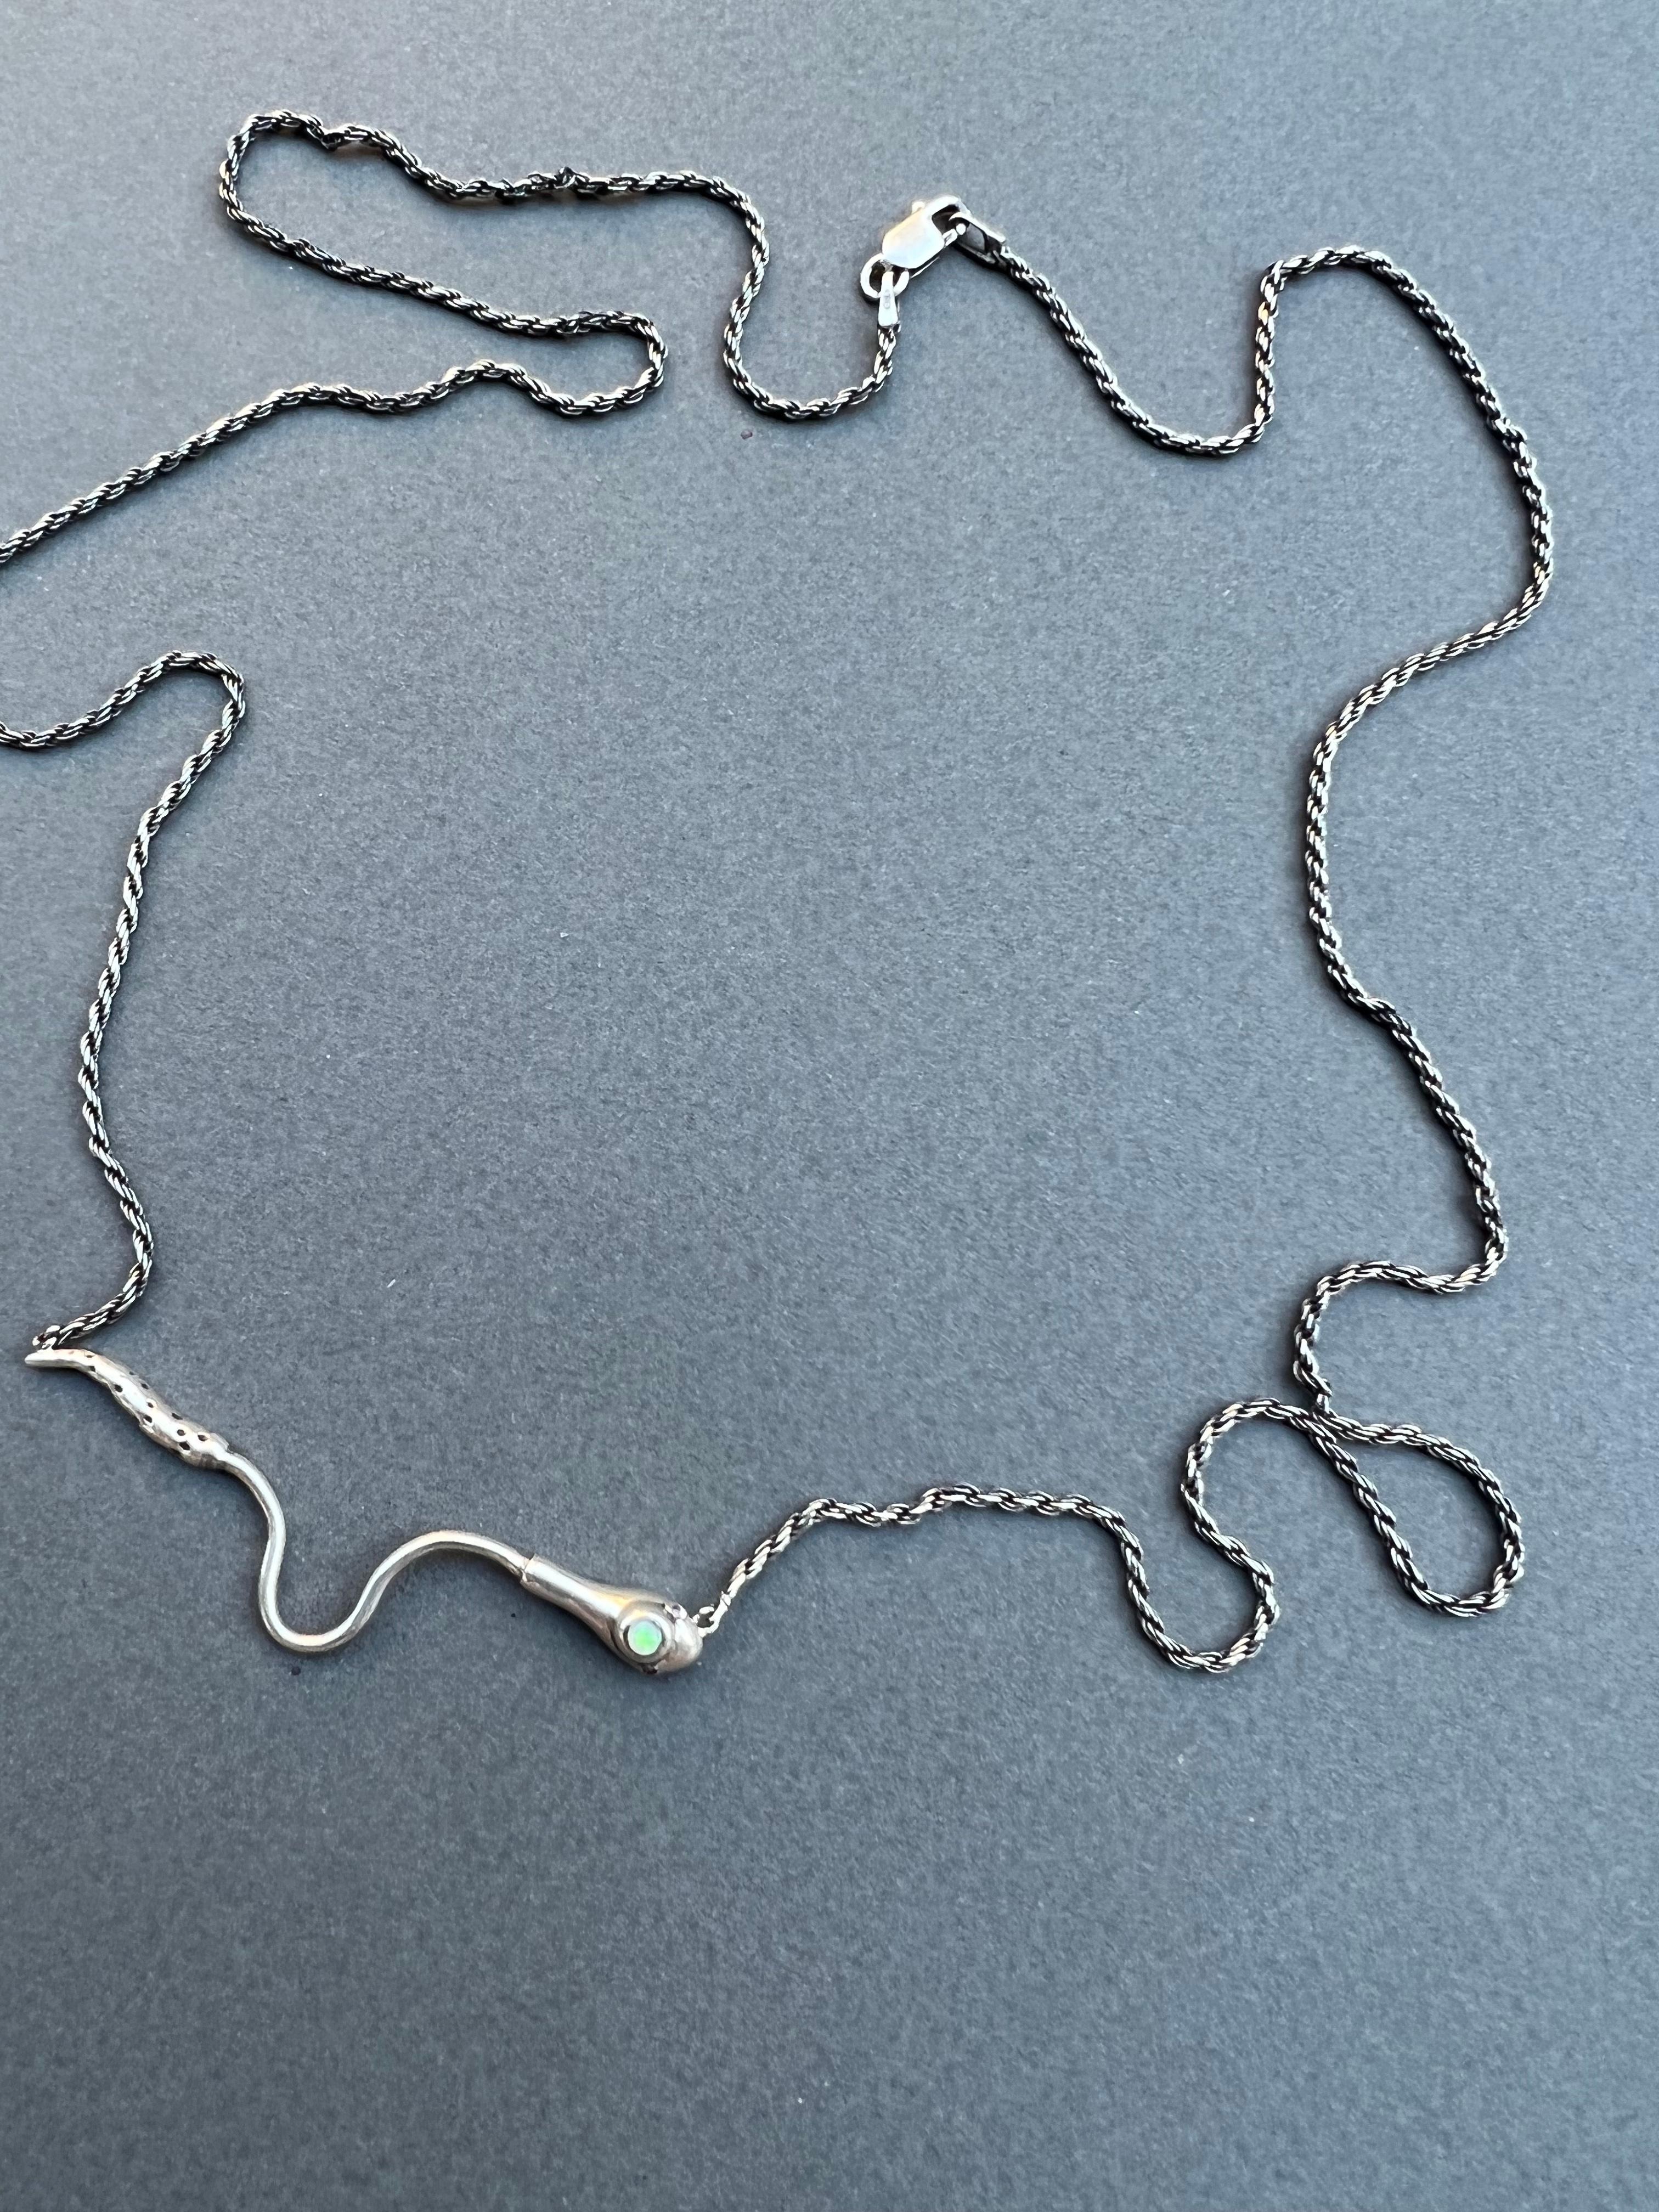 Opal Ruby Snake Necklace Italian Silver Chain J Dauphin For Sale 10